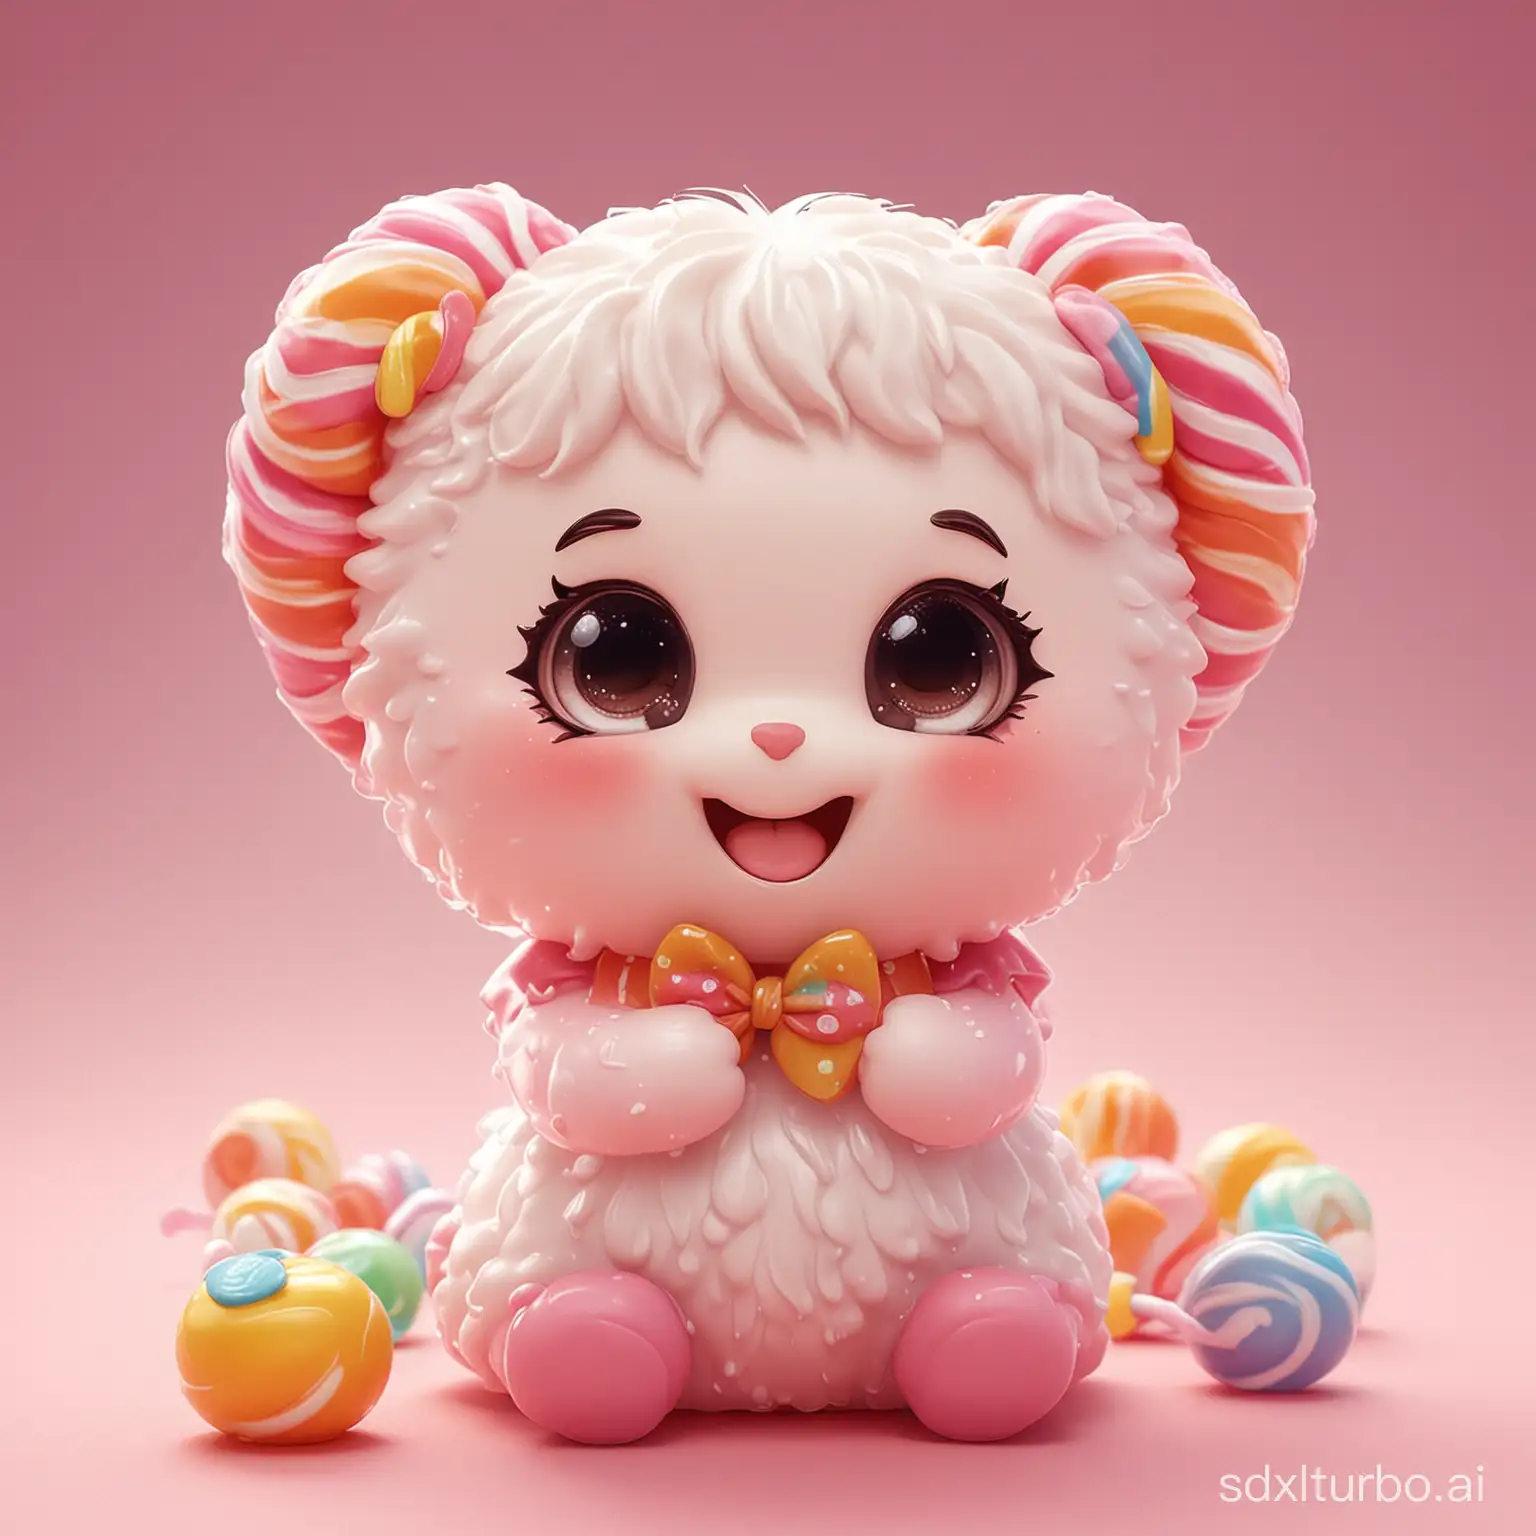 Adorable-HighDefinition-Candy-Anthropomorphism-Sweet-Characters-in-MovieQuality